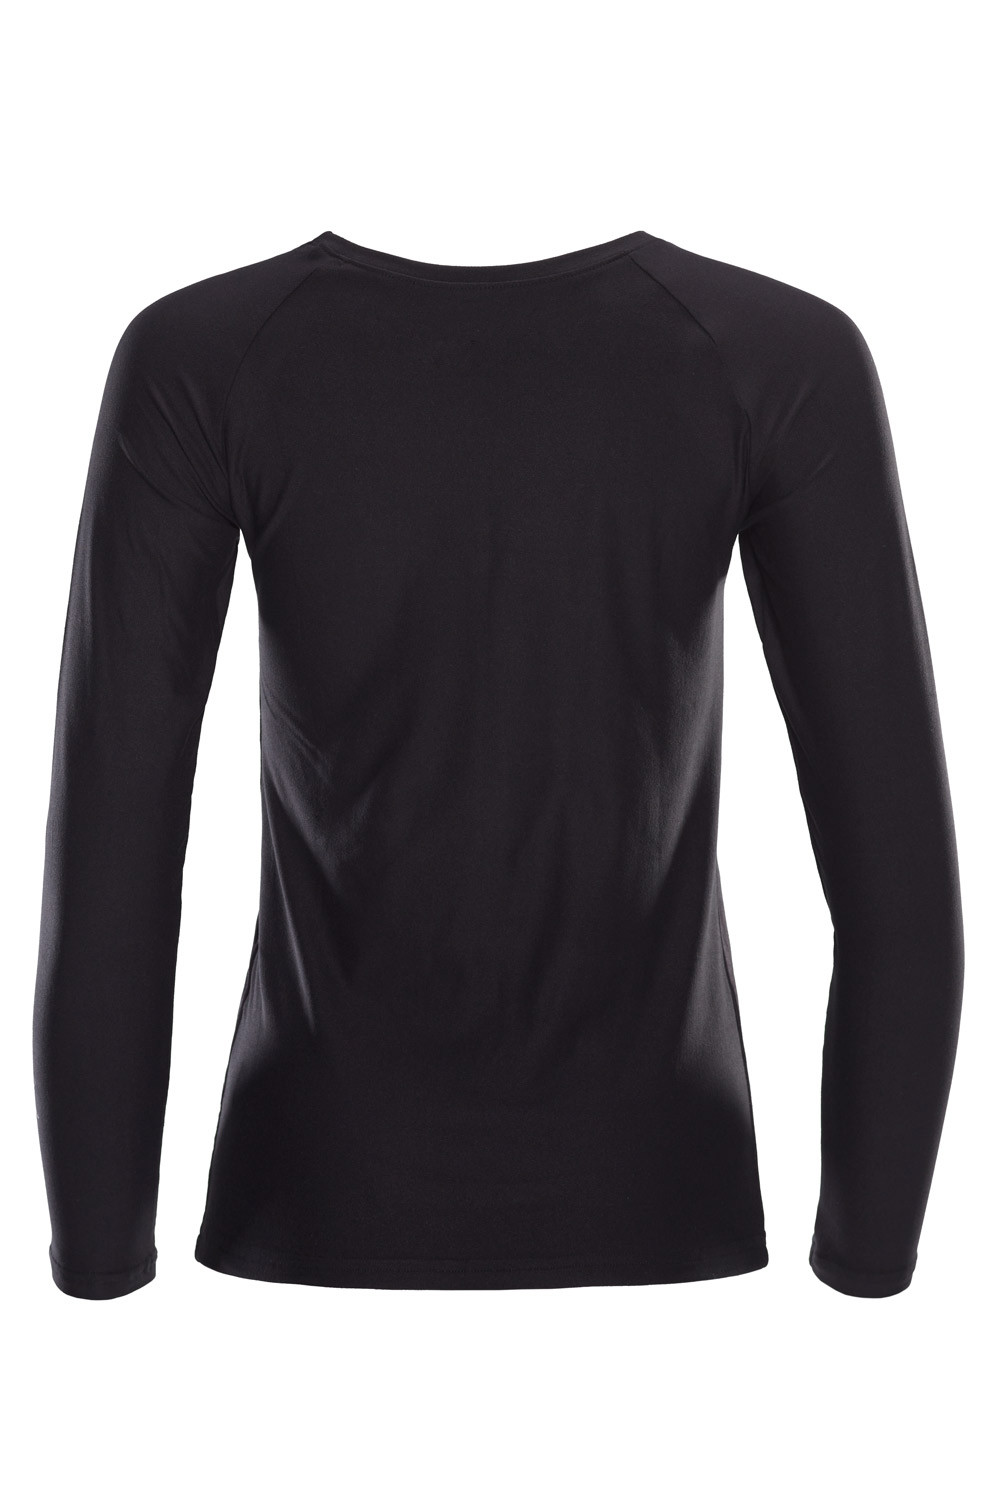 Ultra Sleeve Panther, Winshape Soft and Functional Light Soft Style Long Top AET120LS,